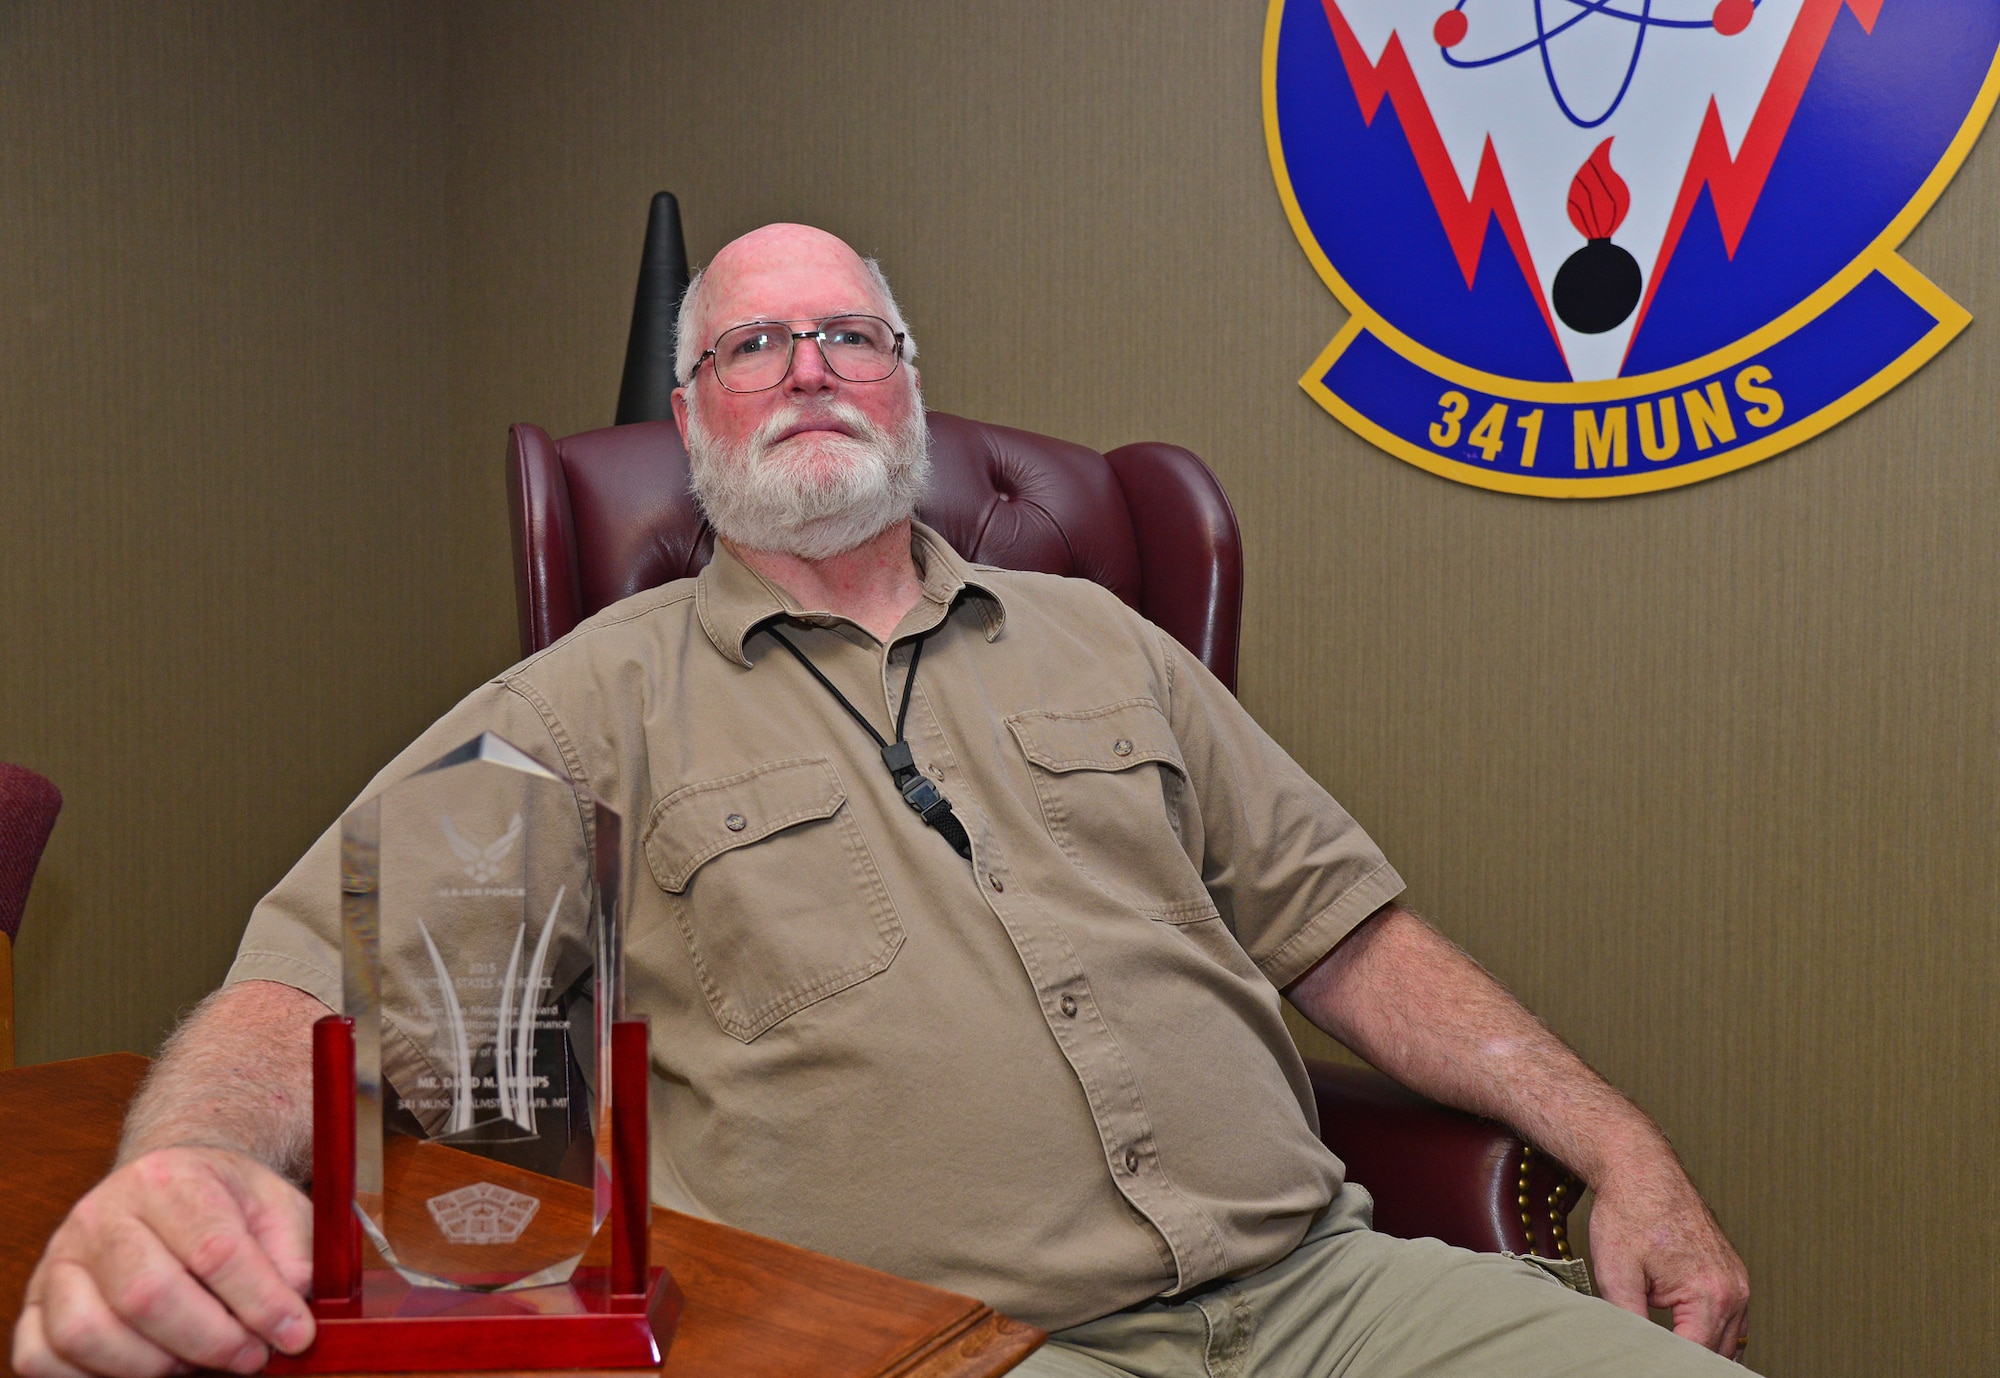 David Phillips, 341st Munitions Squadron technical advisor and equipment specialist, sits with his 2015 Lt. Gen. Leo Marquez Air Force level award July 20, 2016, at Malmstrom Air Force Base, Mont. This award is Phillips’ first Air Force level award in his career. (U.S. Air Force photo/Airman 1st Class Daniel Brosam)